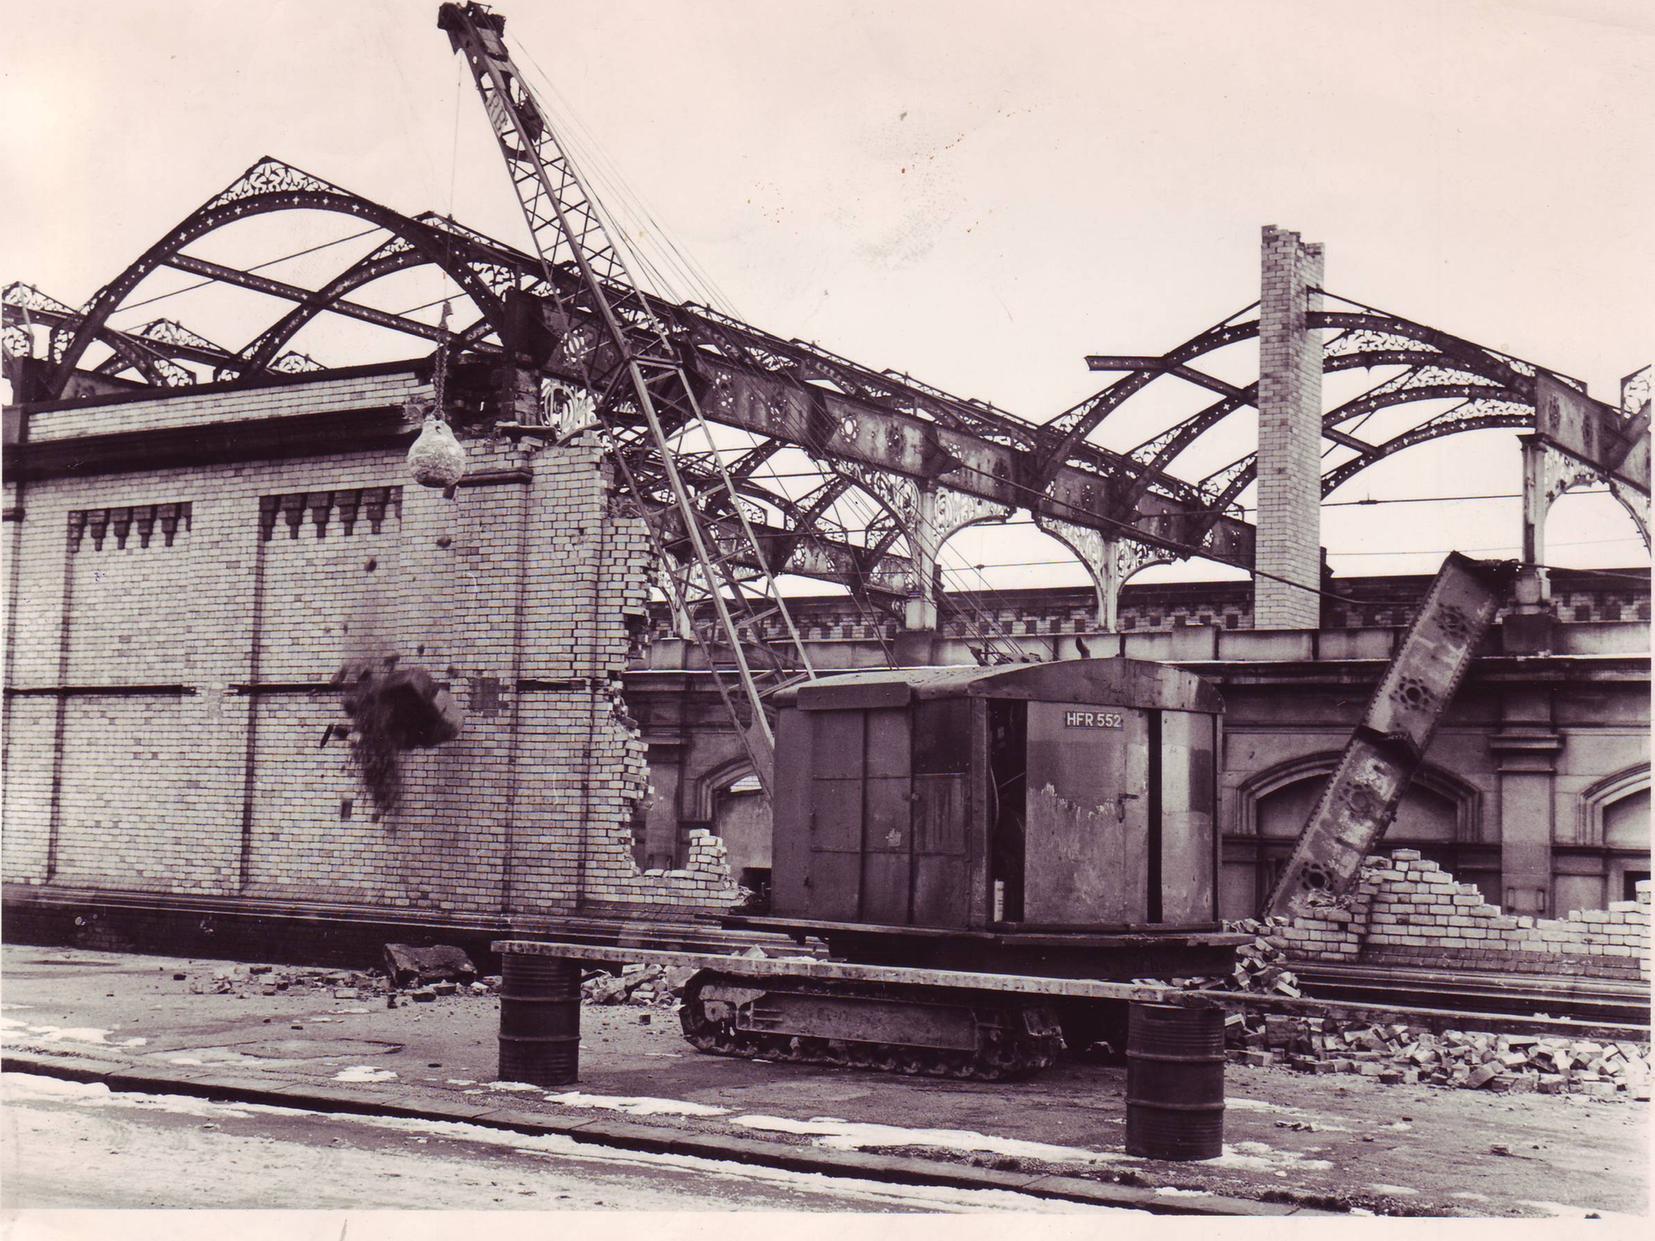 The demolition of the station gets underway